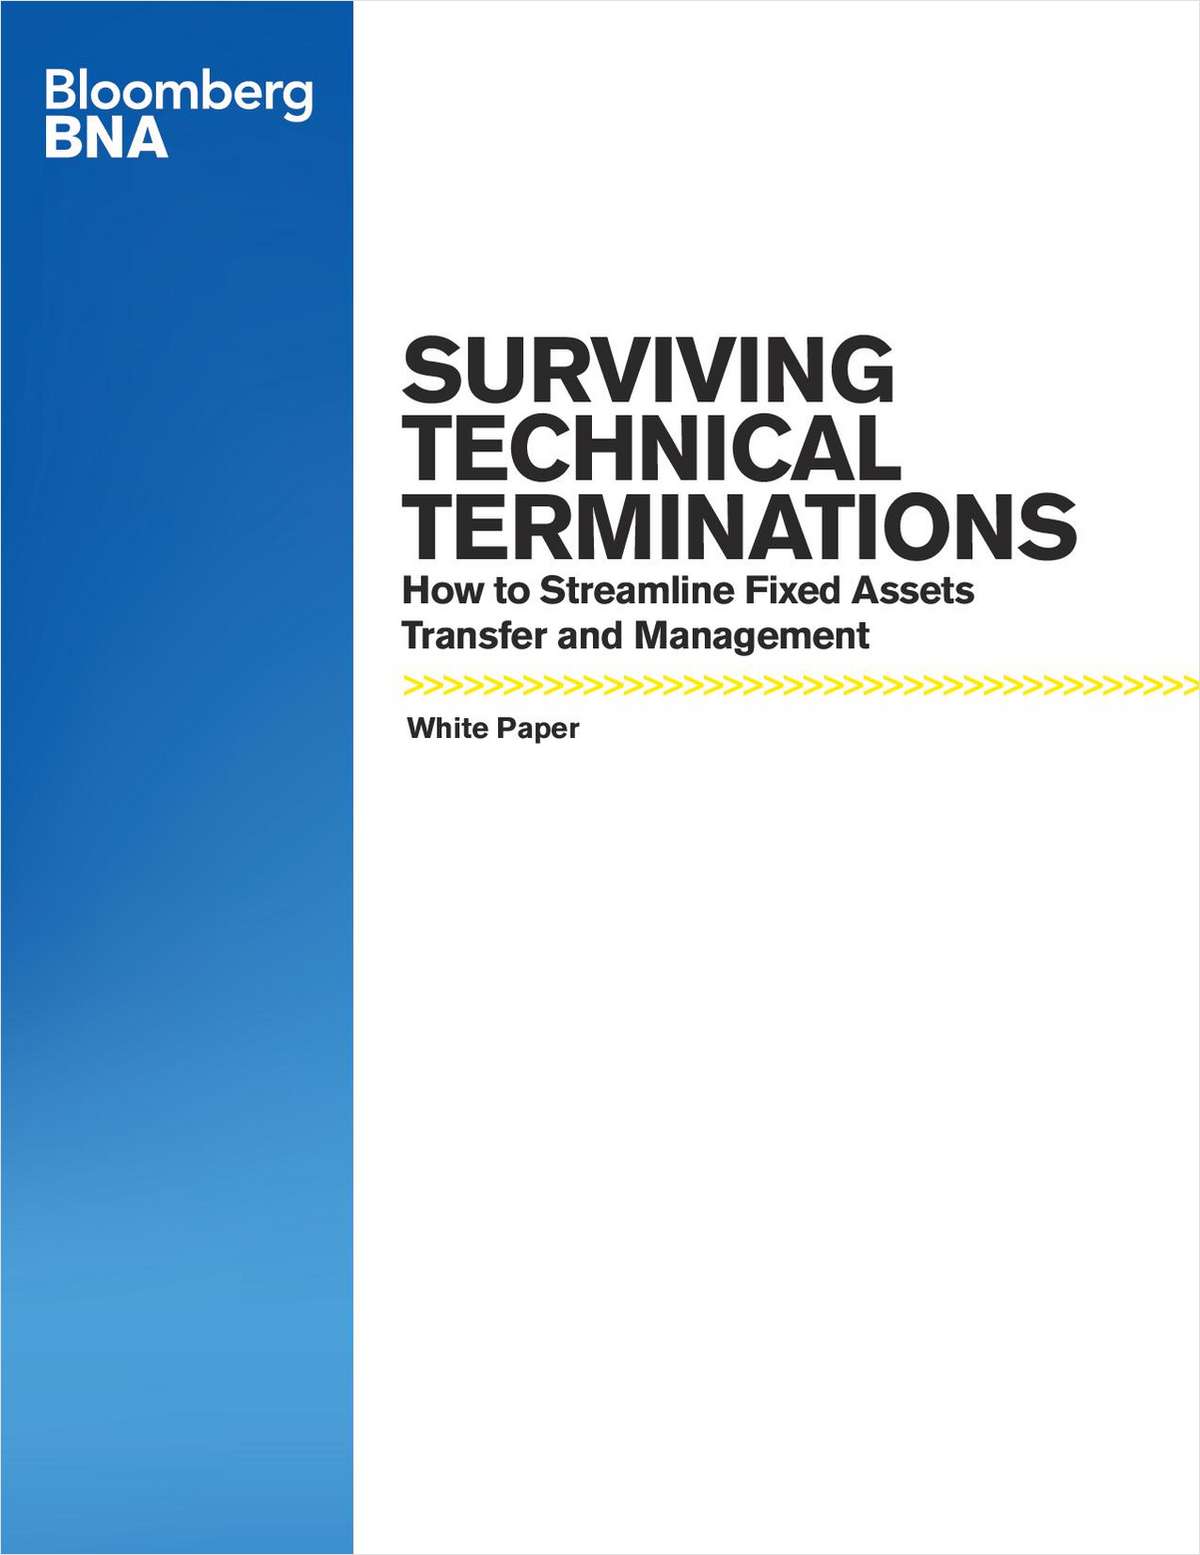 Surviving Technical Terminations: How to Streamline Fixed Assets Transfer and Management